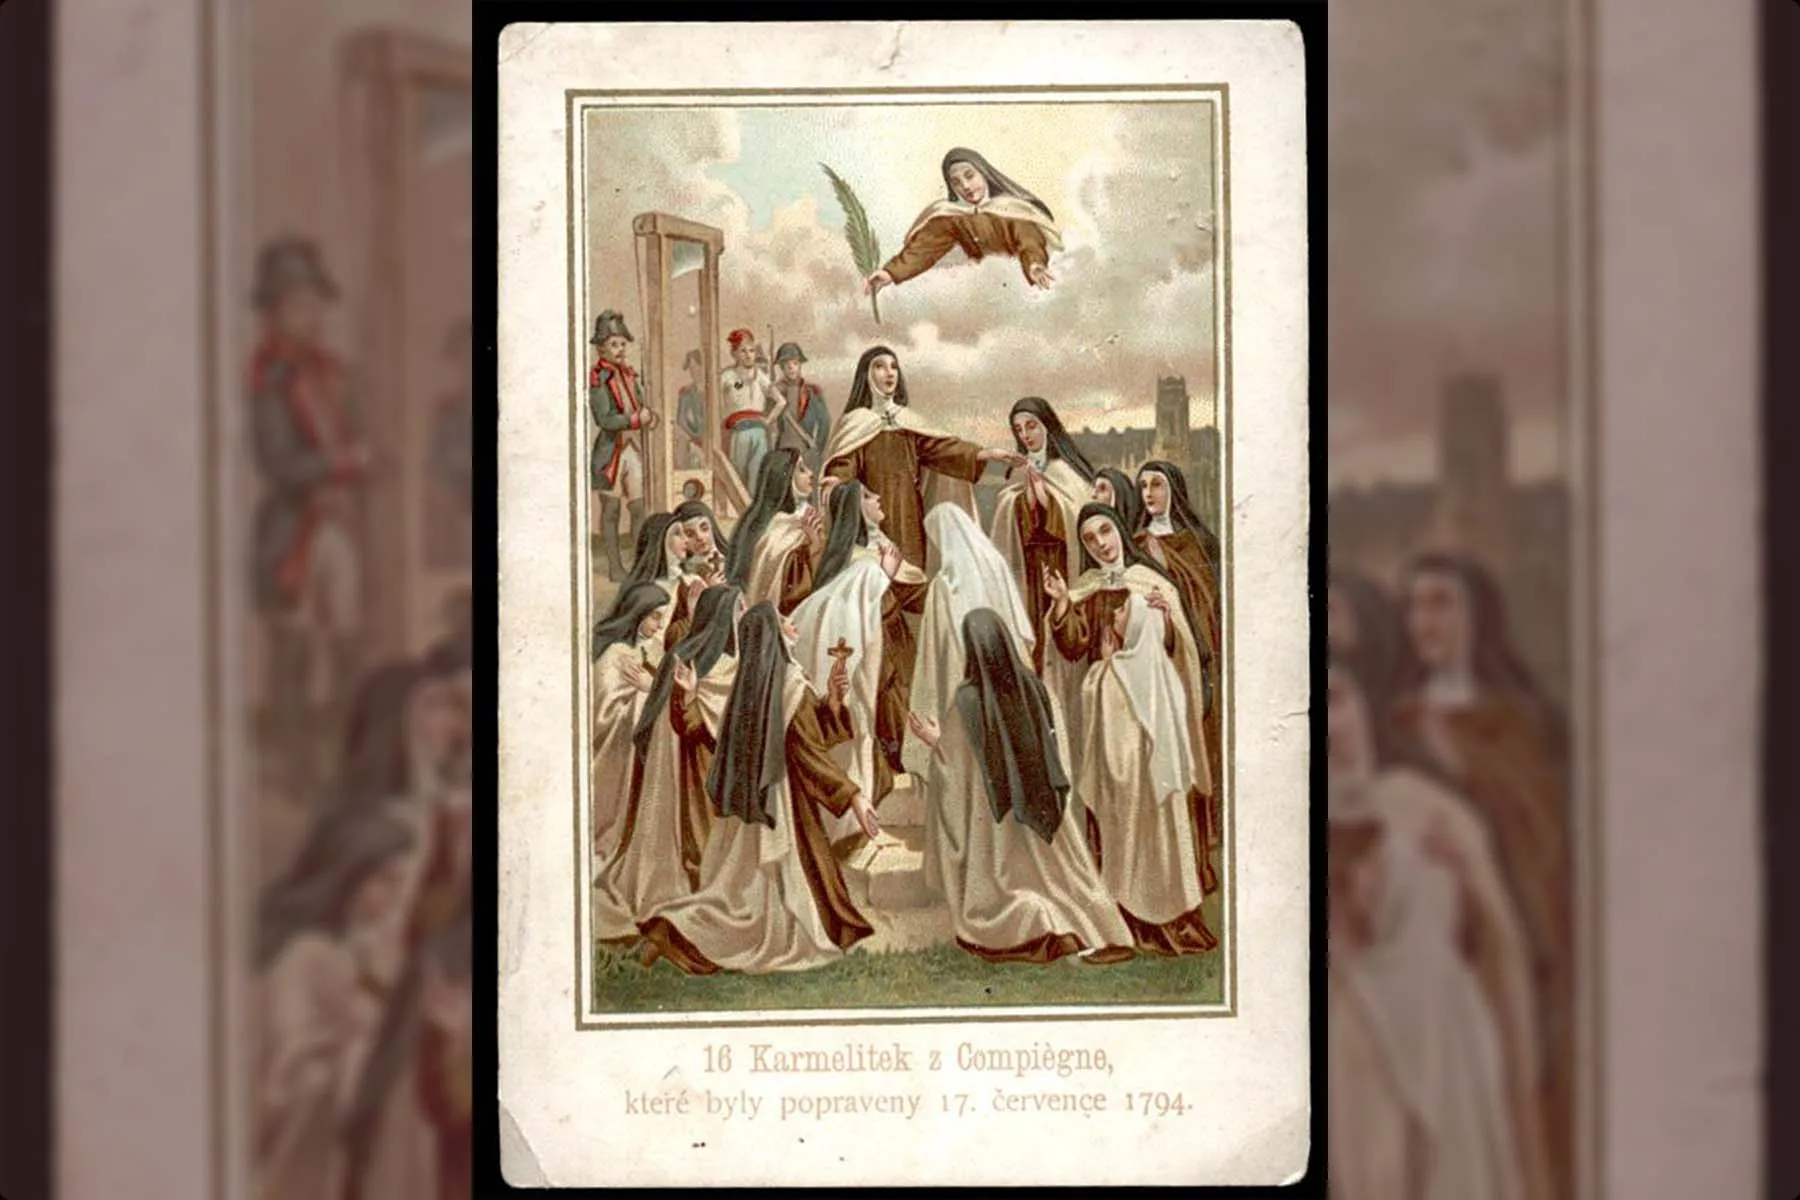 Blessed Martyrs of Compiègne were guillotined for their faith on July 17, 1794.?w=200&h=150